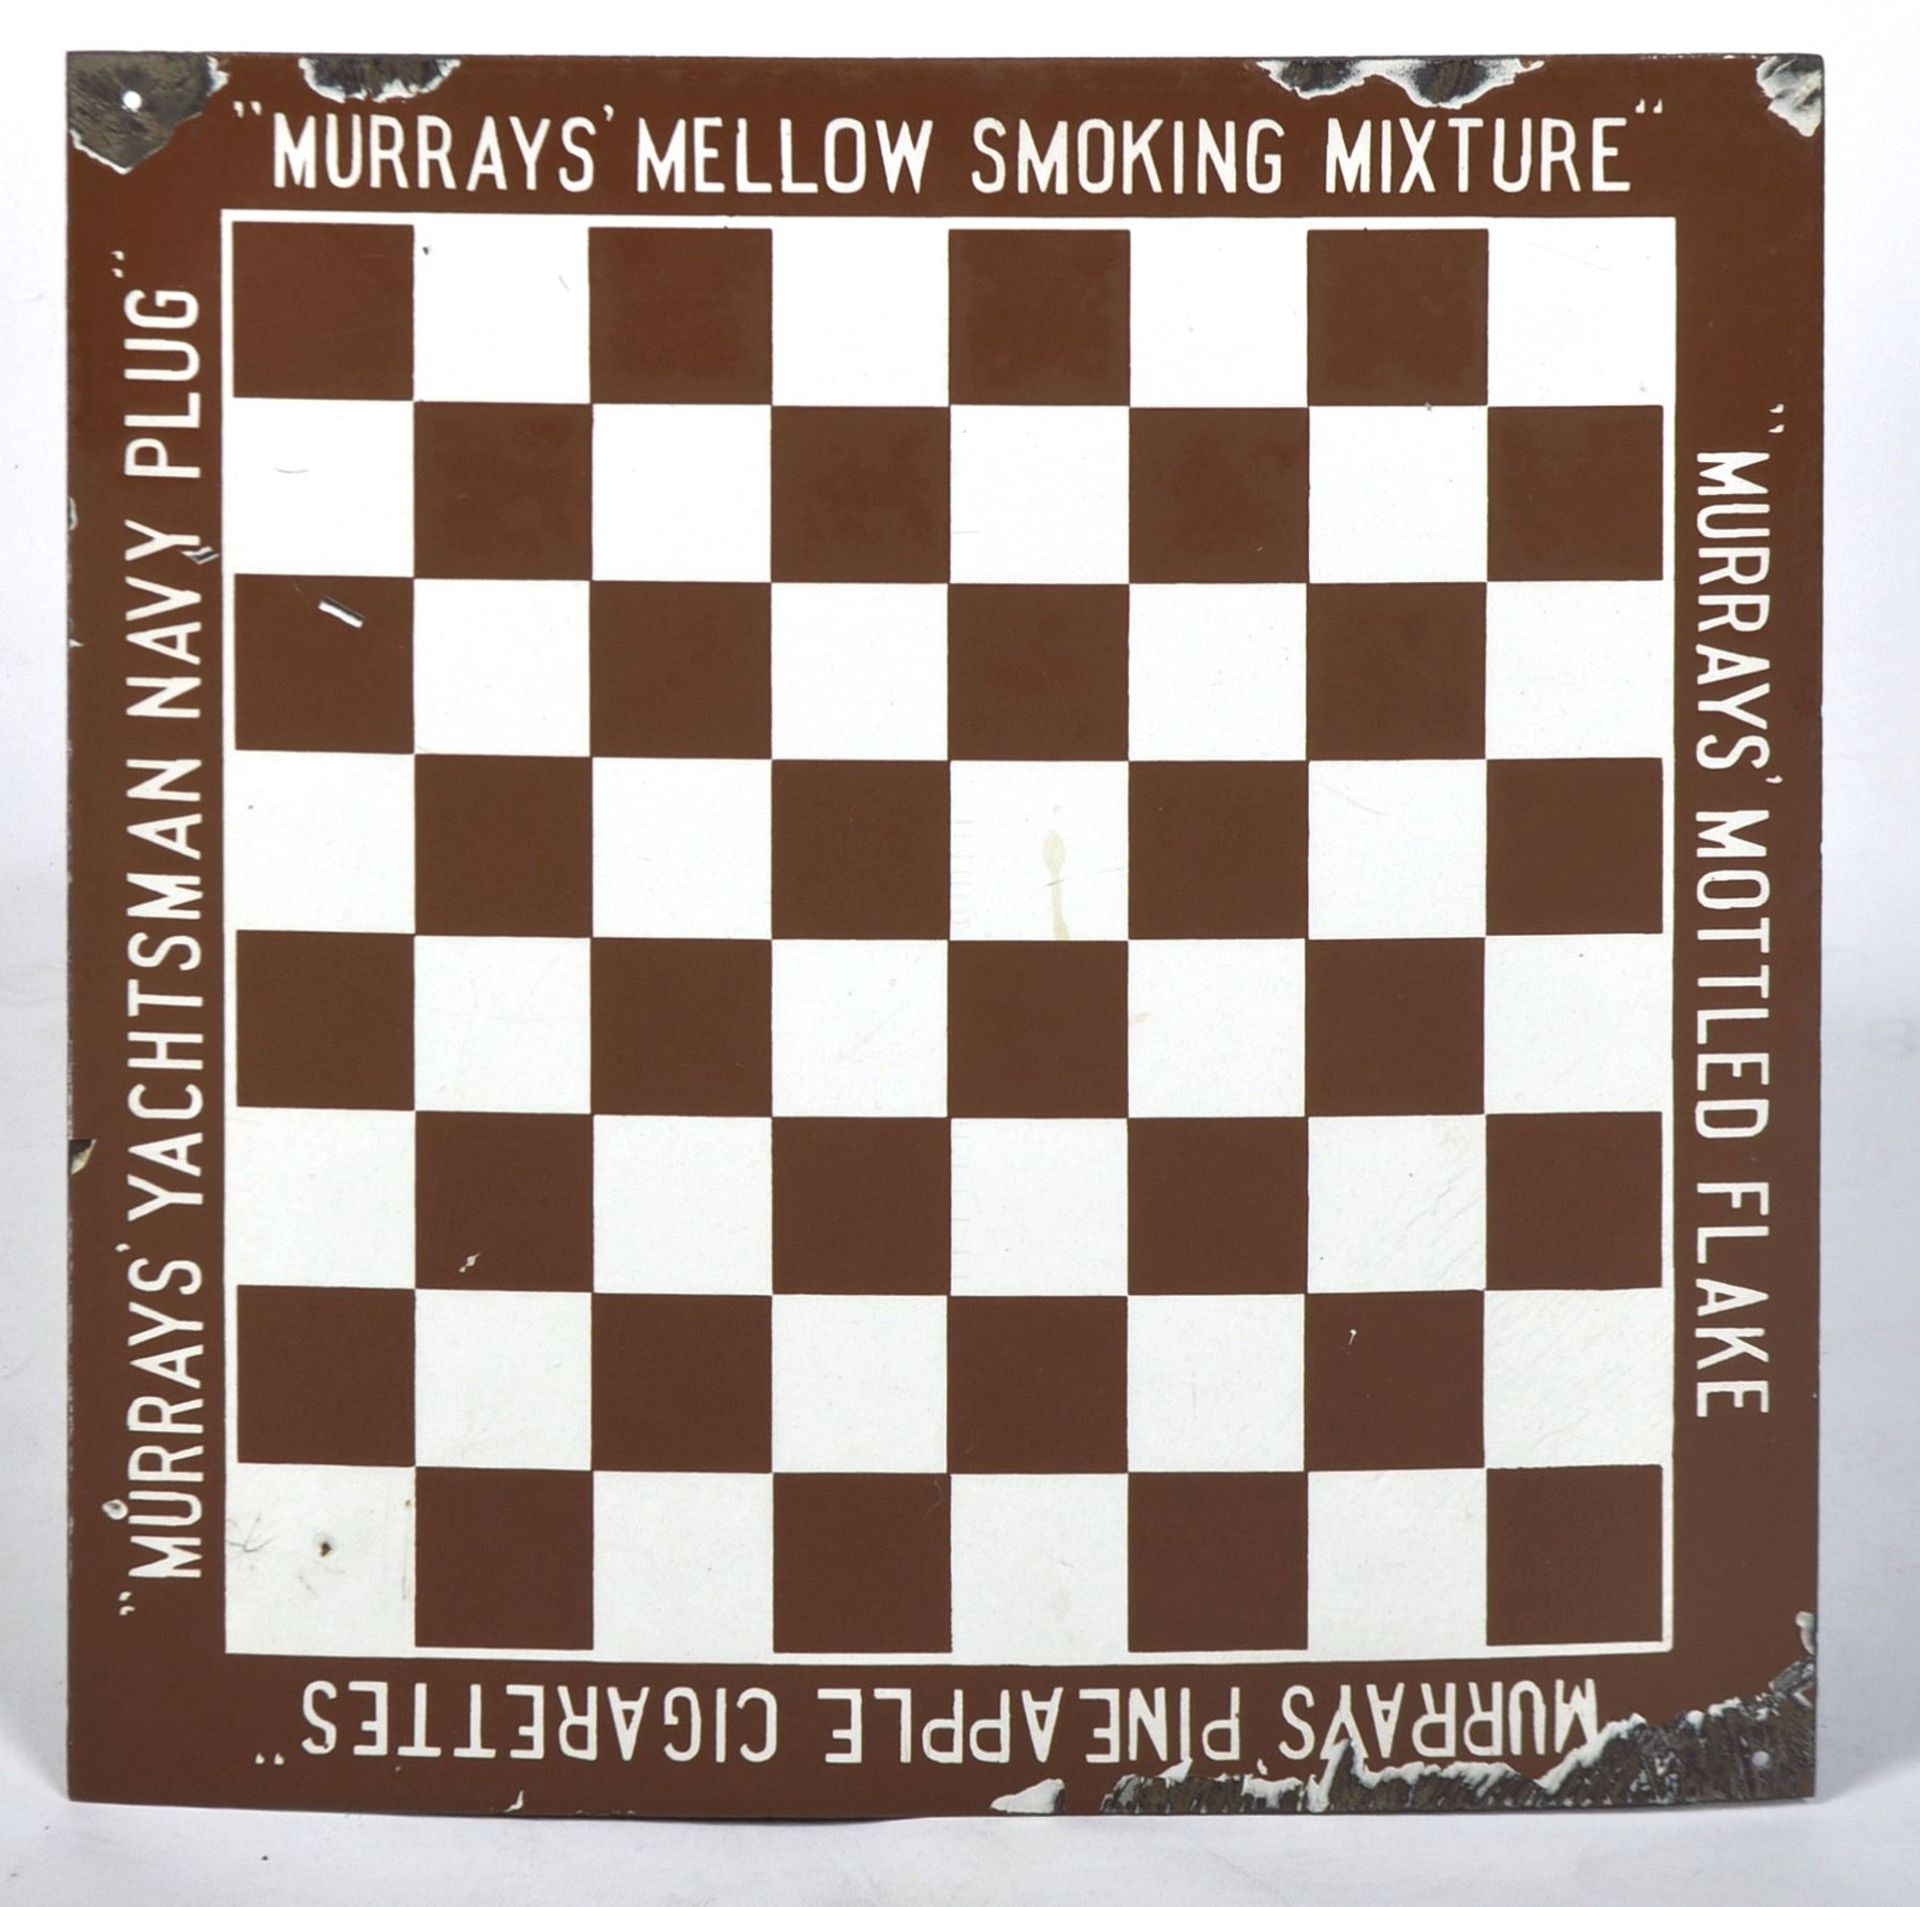 MYRRAY, SONS AND COMPANY - CHESS BOARD ENAMEL ADVERTISING SIGN